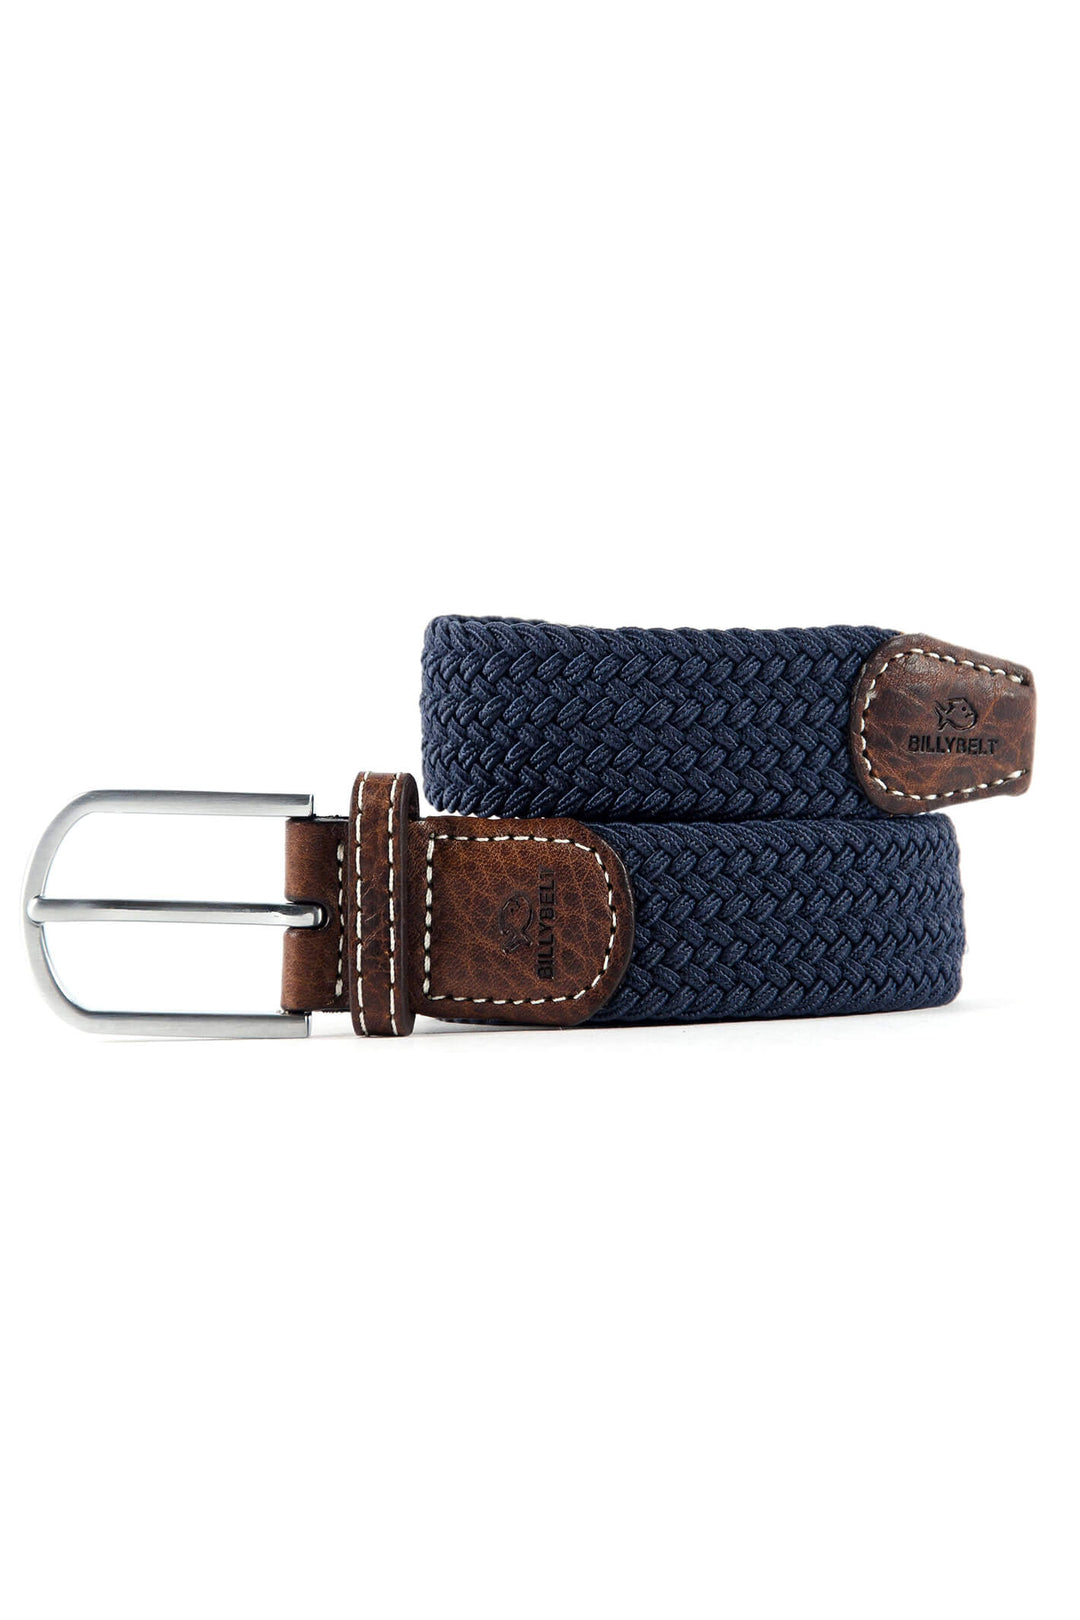 Billy Belt Navy Marine Blue Wide Elasticated Woven & Leather Belt - Experience Boutique